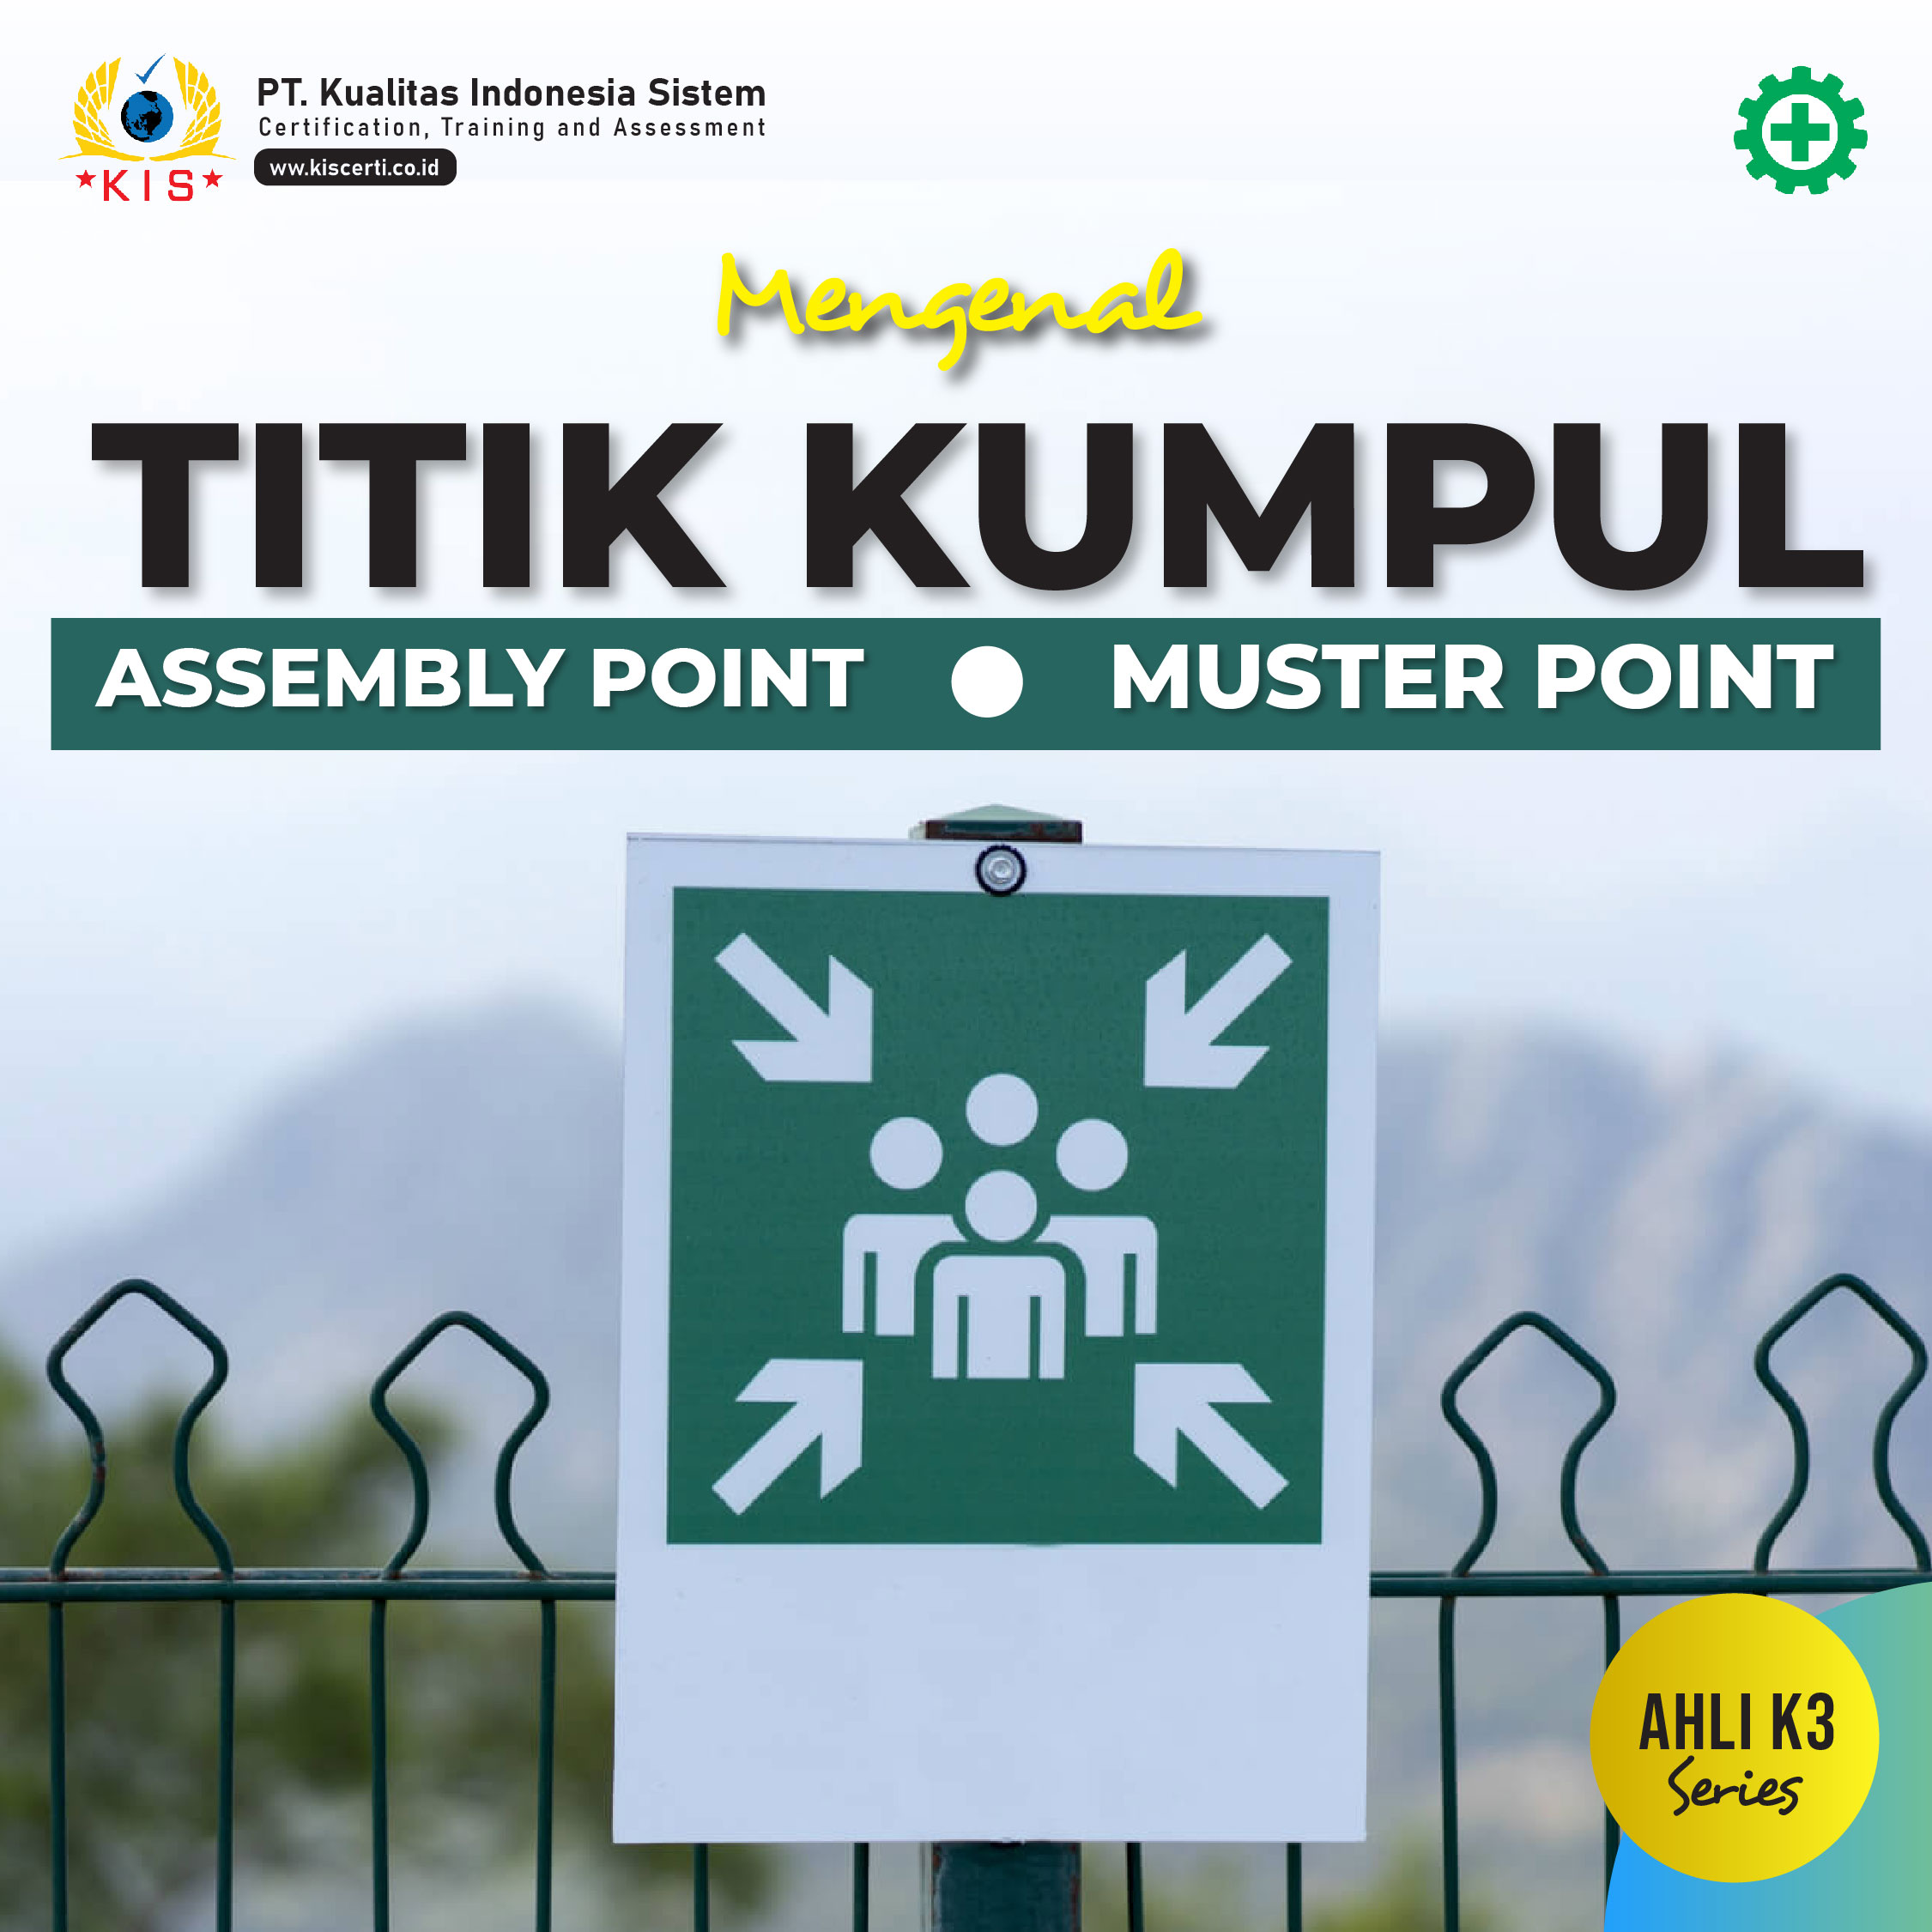 Titik kumpul/ assembly point/ muster point 